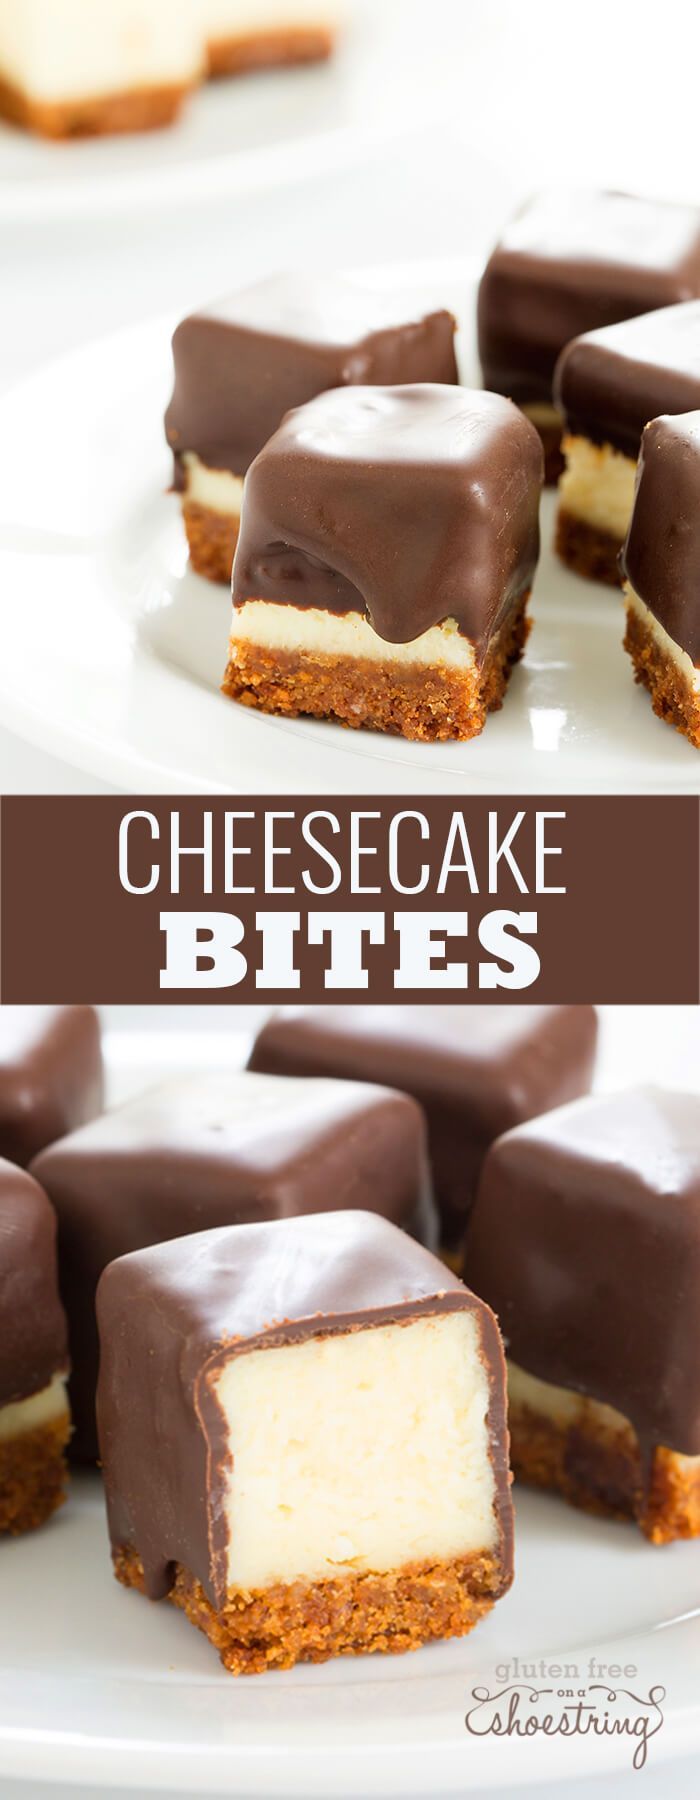 Cheesecake bites are nothing more than little chocolate-covered bites of creamy cheesecake. No special equipment and no water bath